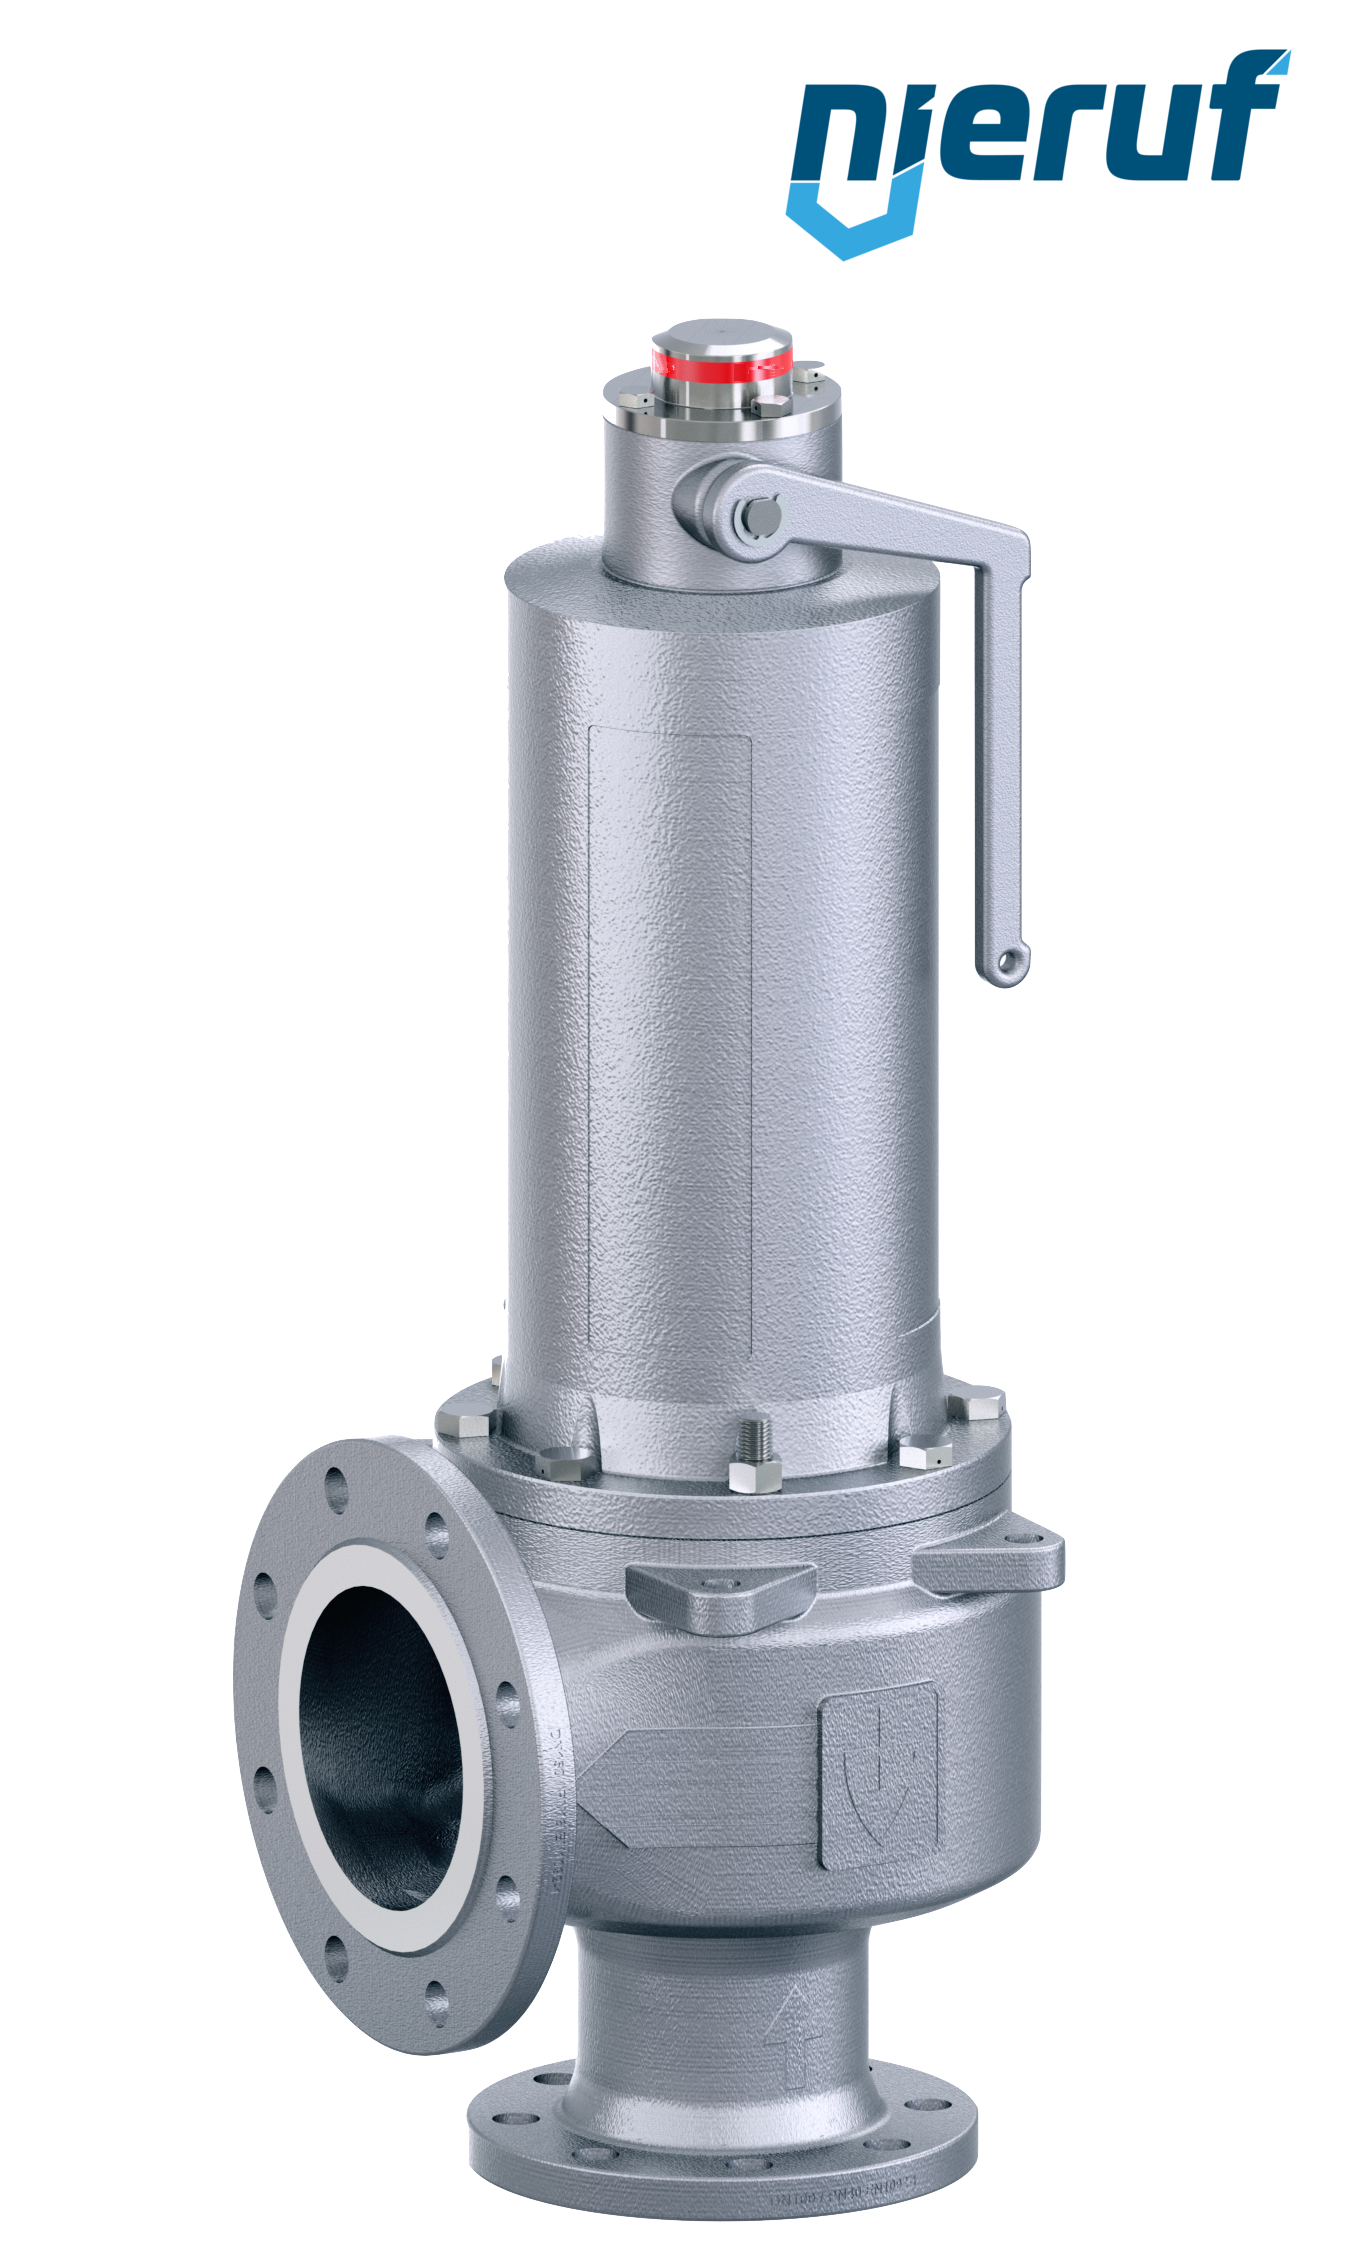 flange-safety valve DN100/DN150 SF04, stainless steel metal, with lifting device lever